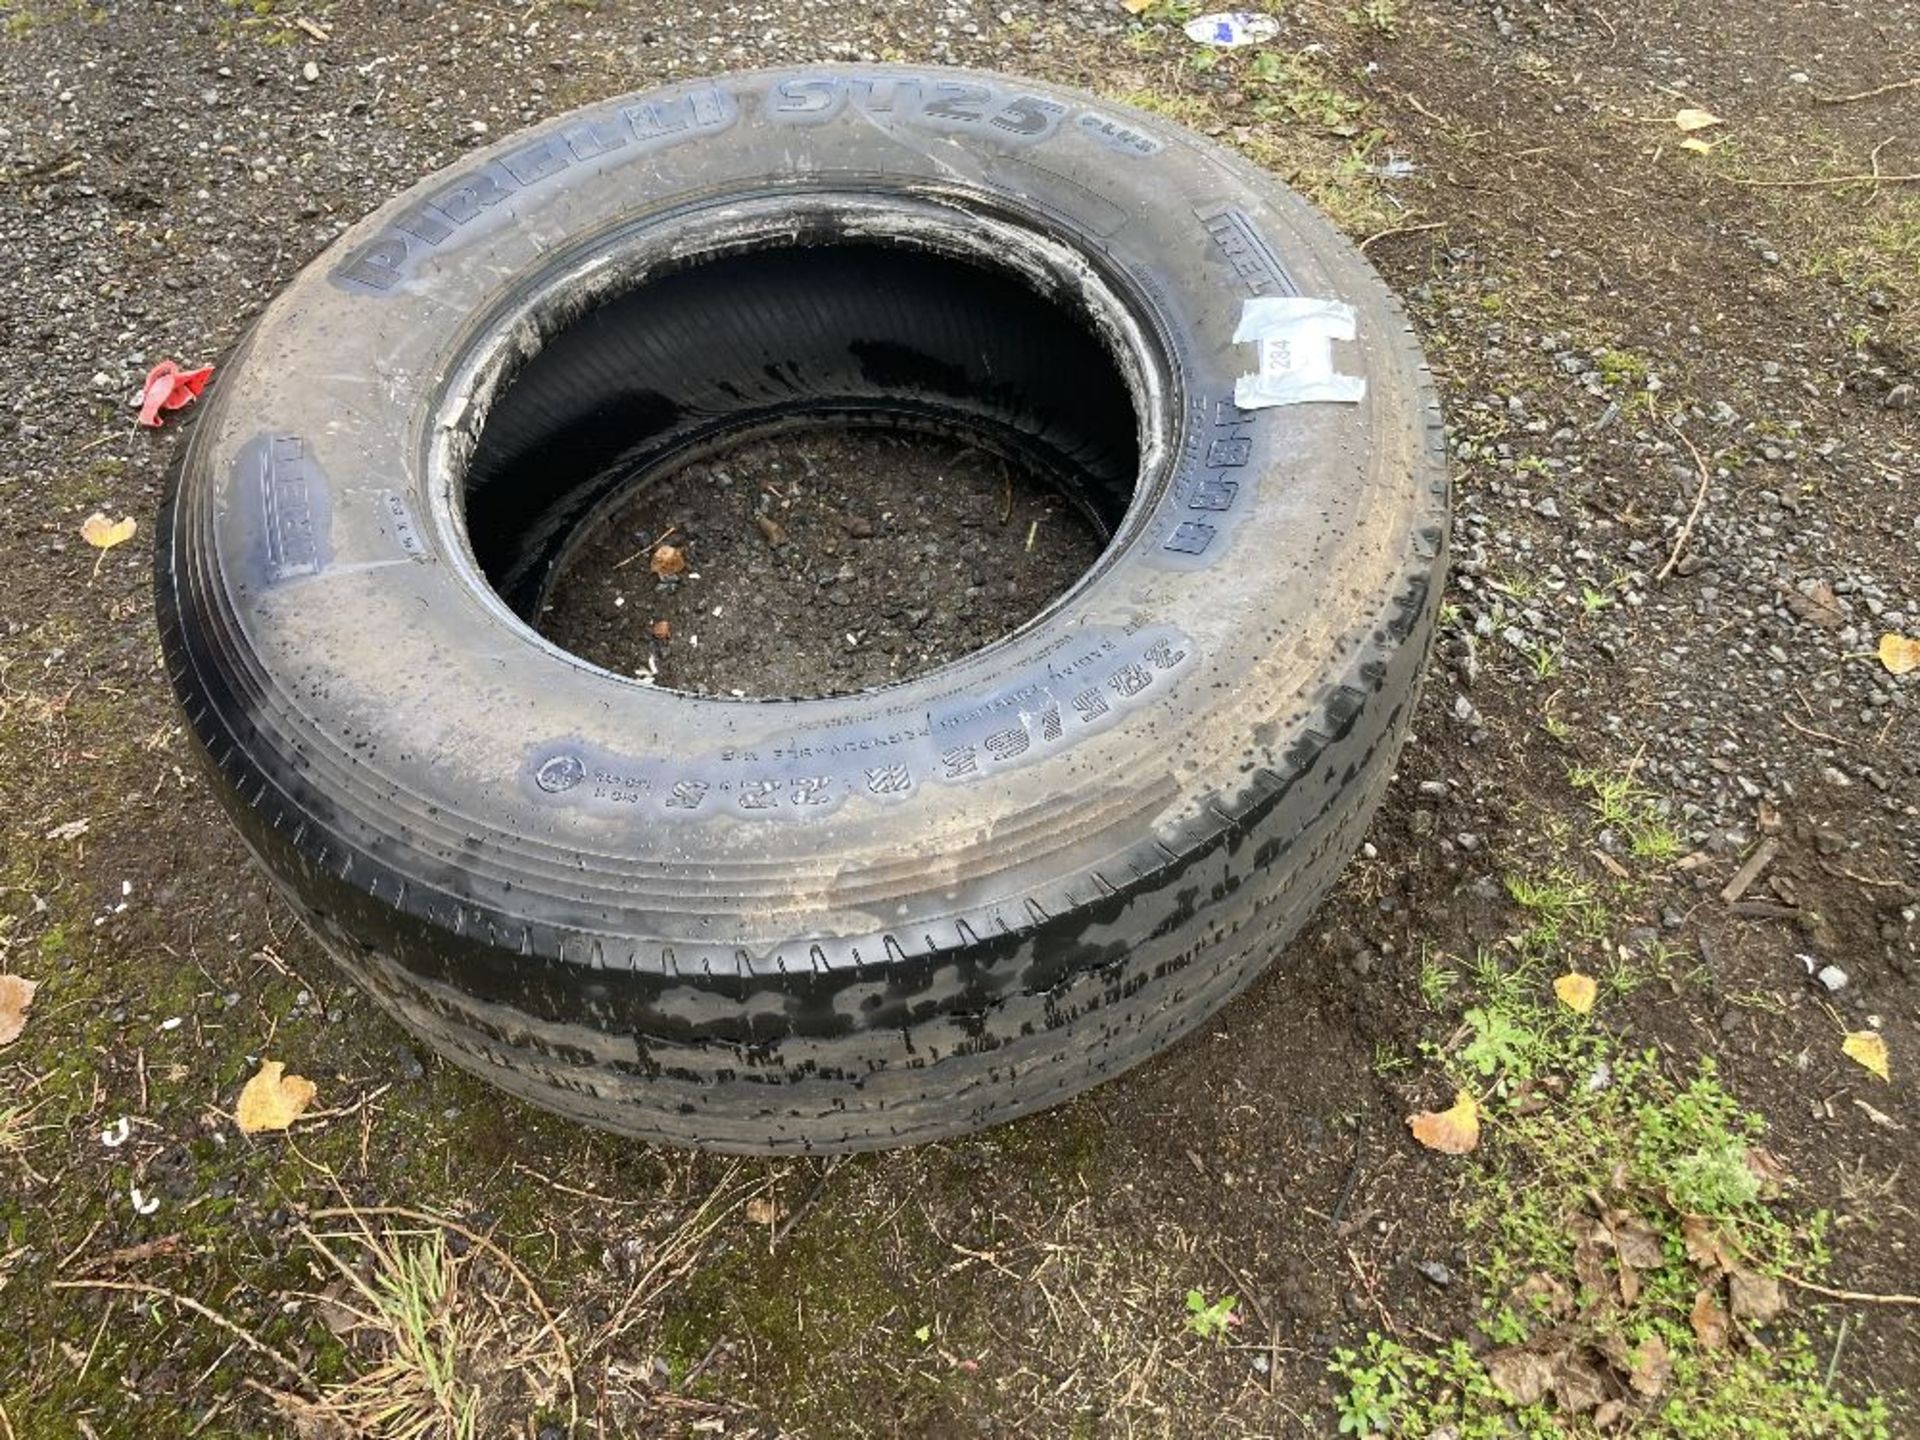 Pirelli ST25 385/65R 22.5 radial tubeless regroovable HGV tyre - Image 2 of 6